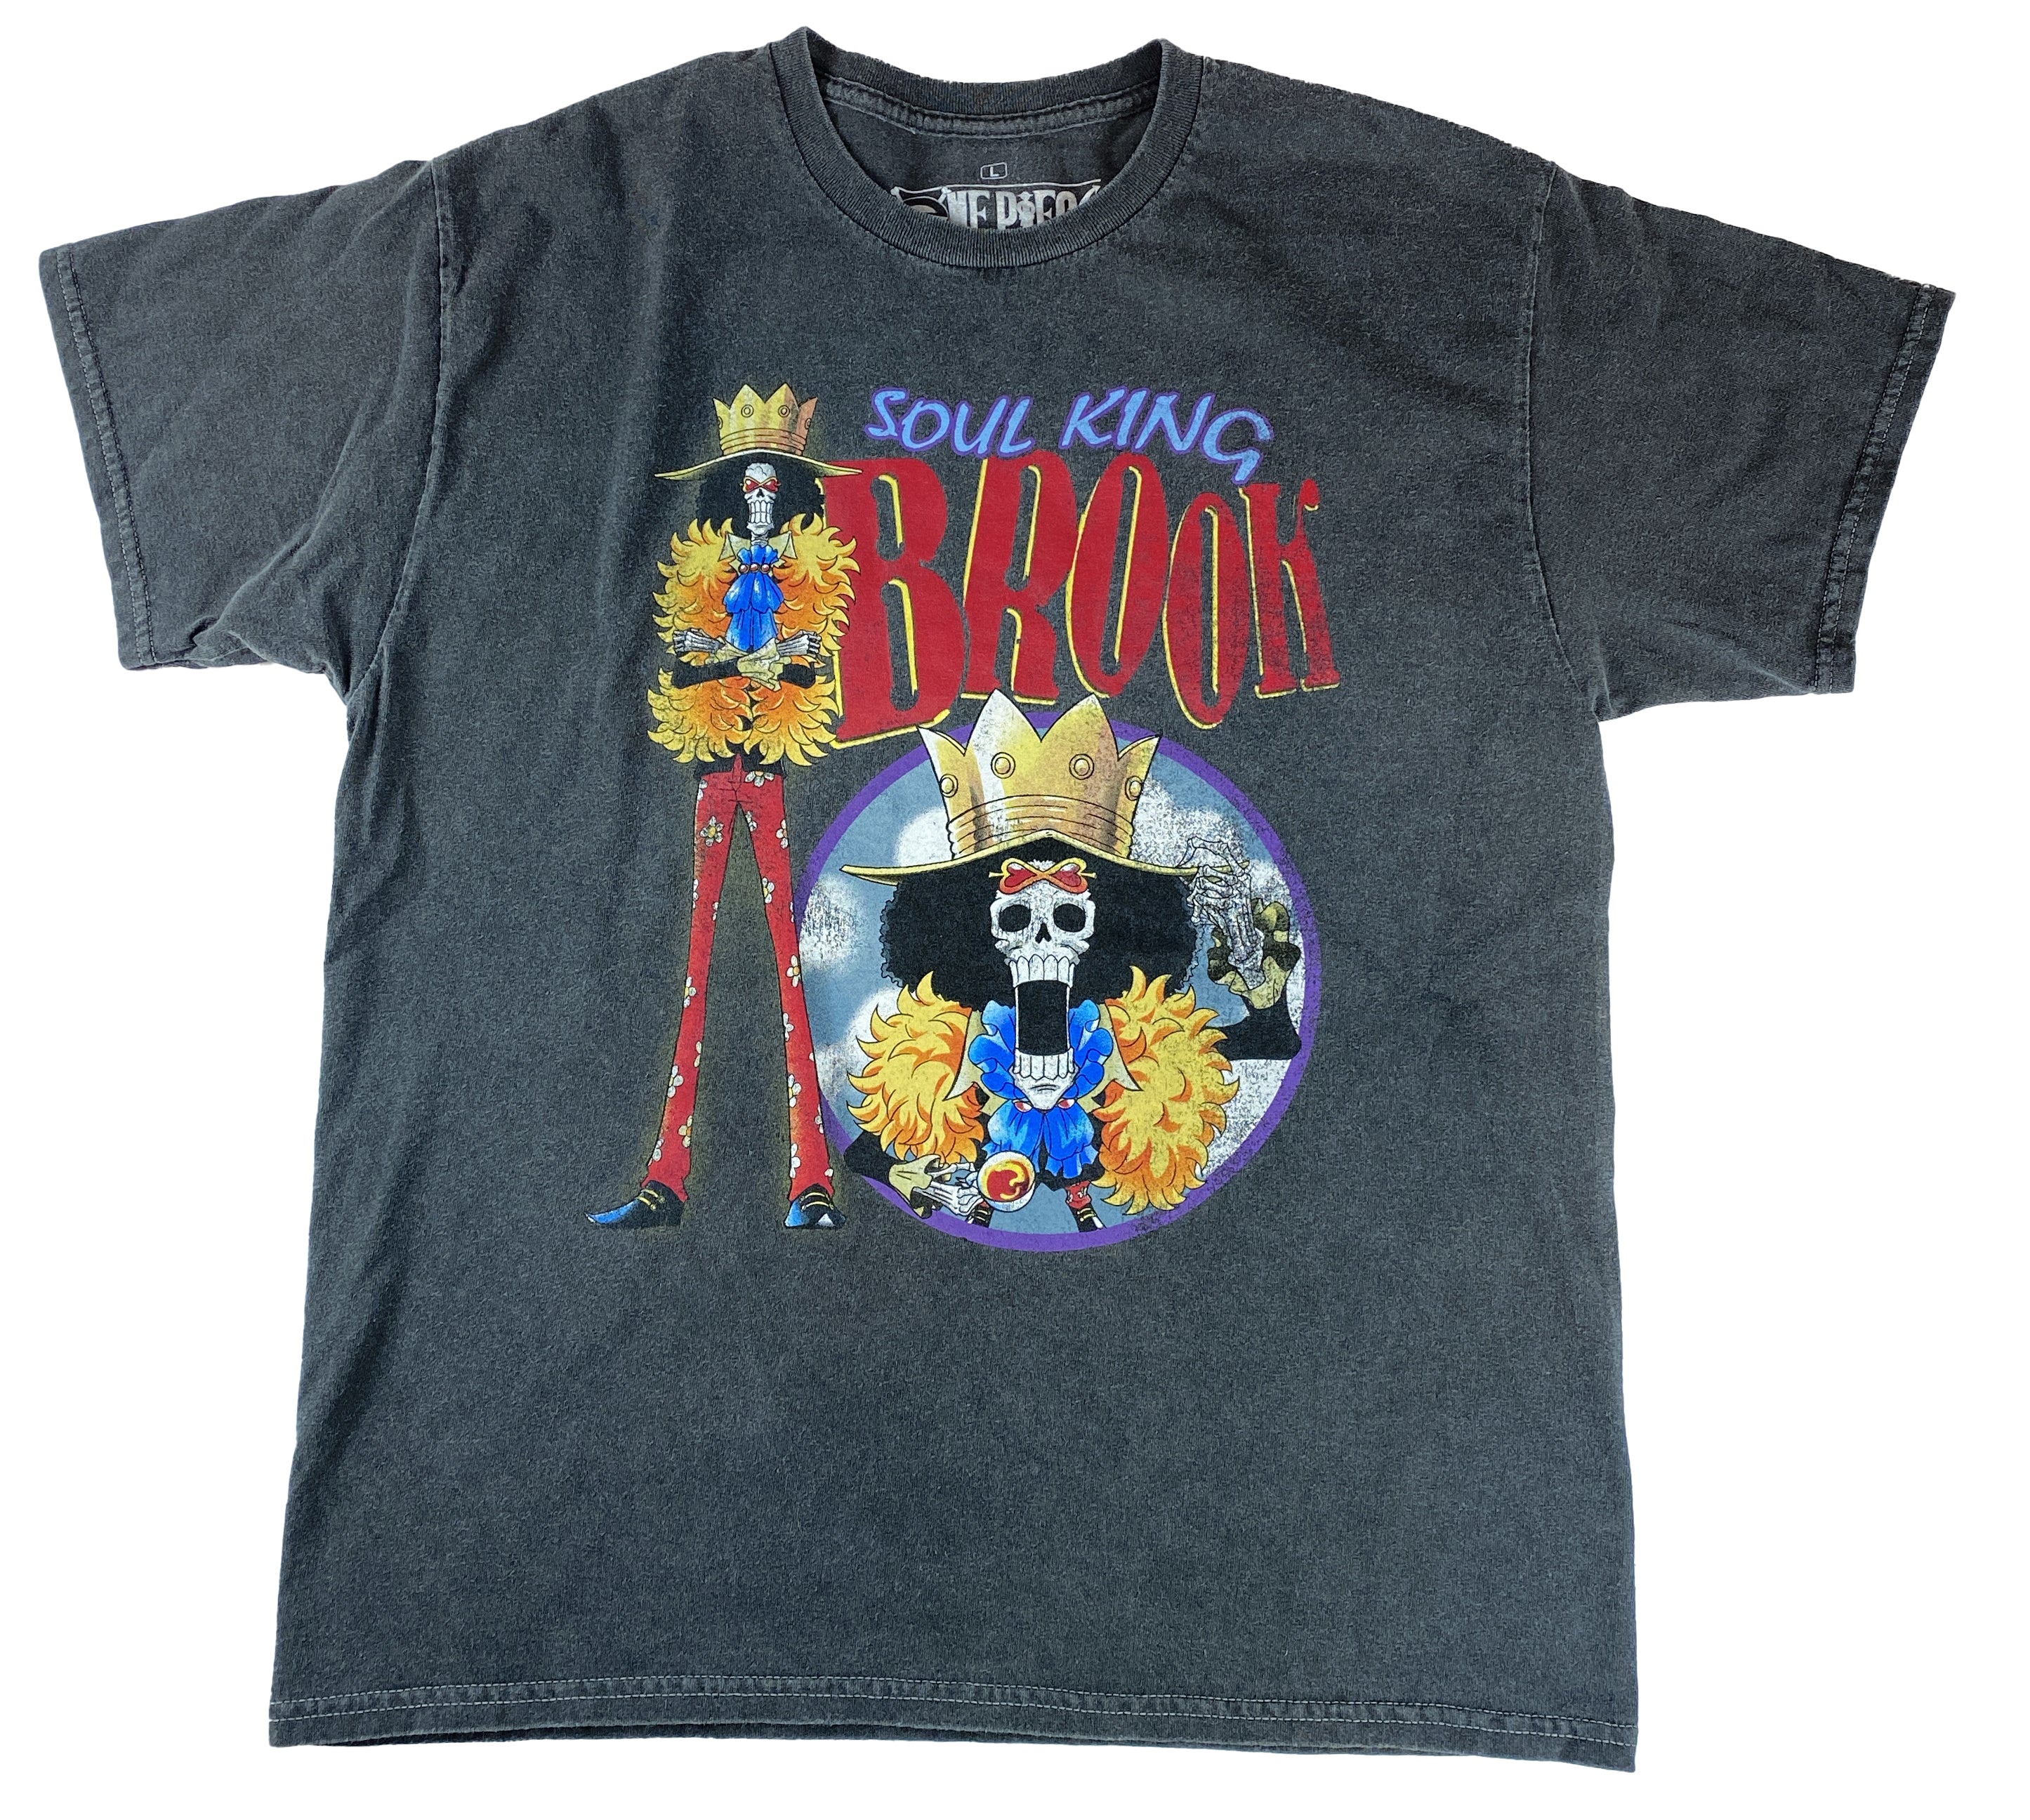 One Piece - Soul King Brook '90s T-Shirt - Crunchyroll Exclusive! image count 0